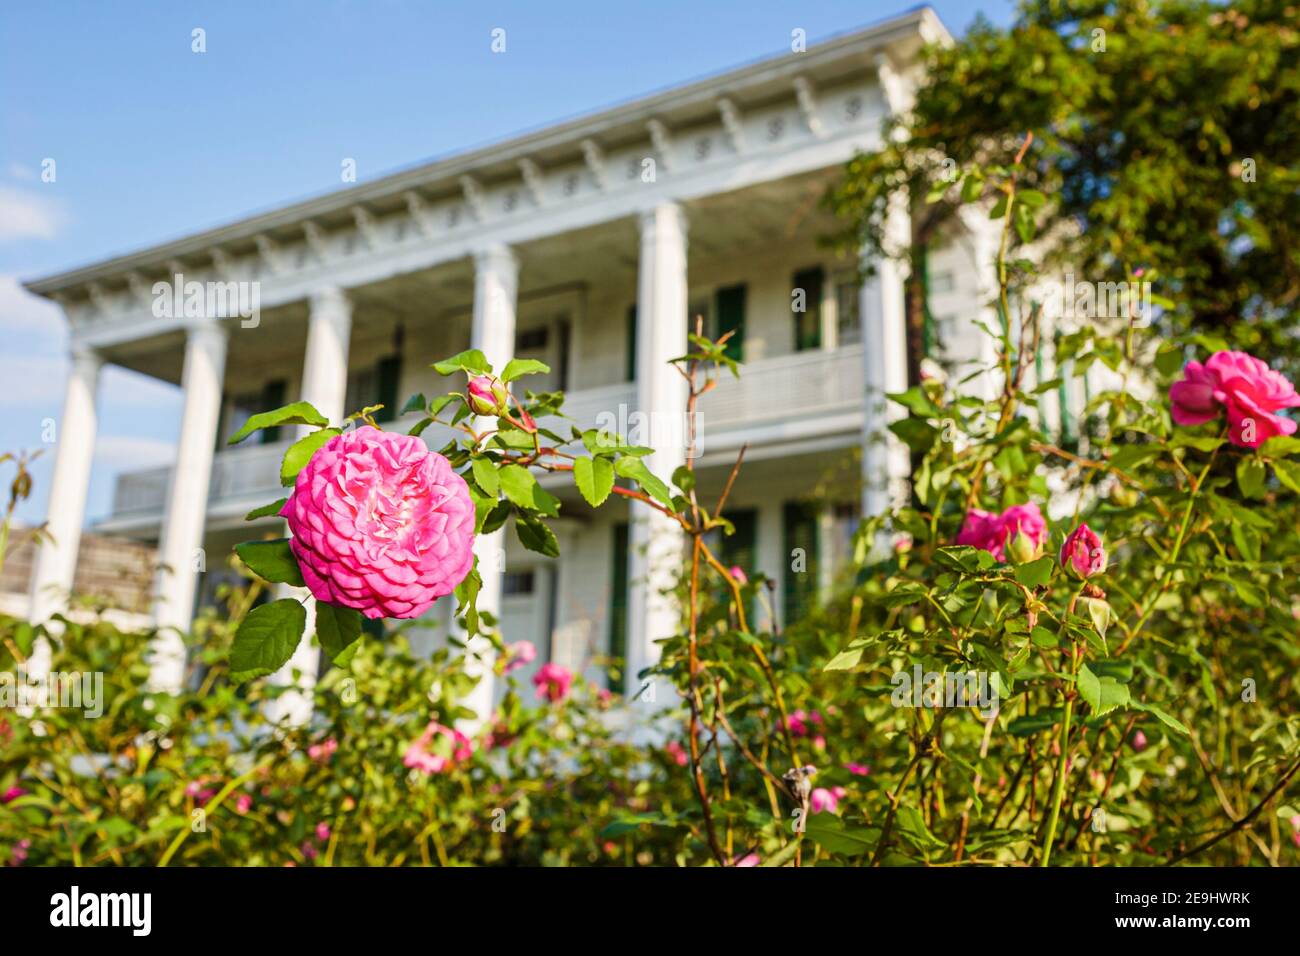 Alabama Montgomery Old Alabama Town restored historical,house home outside exterior front entrance roses flowers, Stock Photo